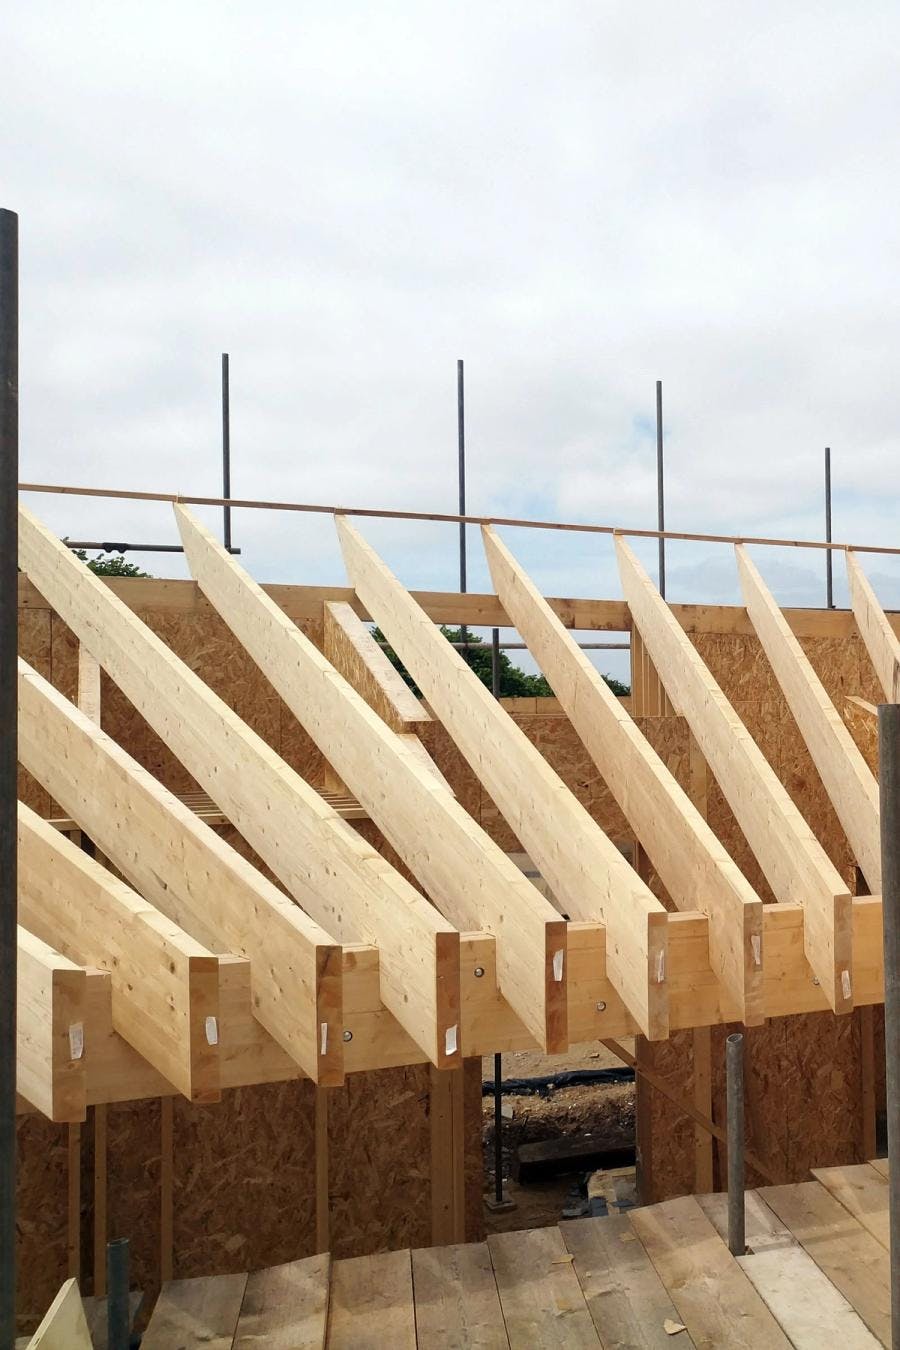 Image of roof joists on a Paragraph 80 home by Studio Bark